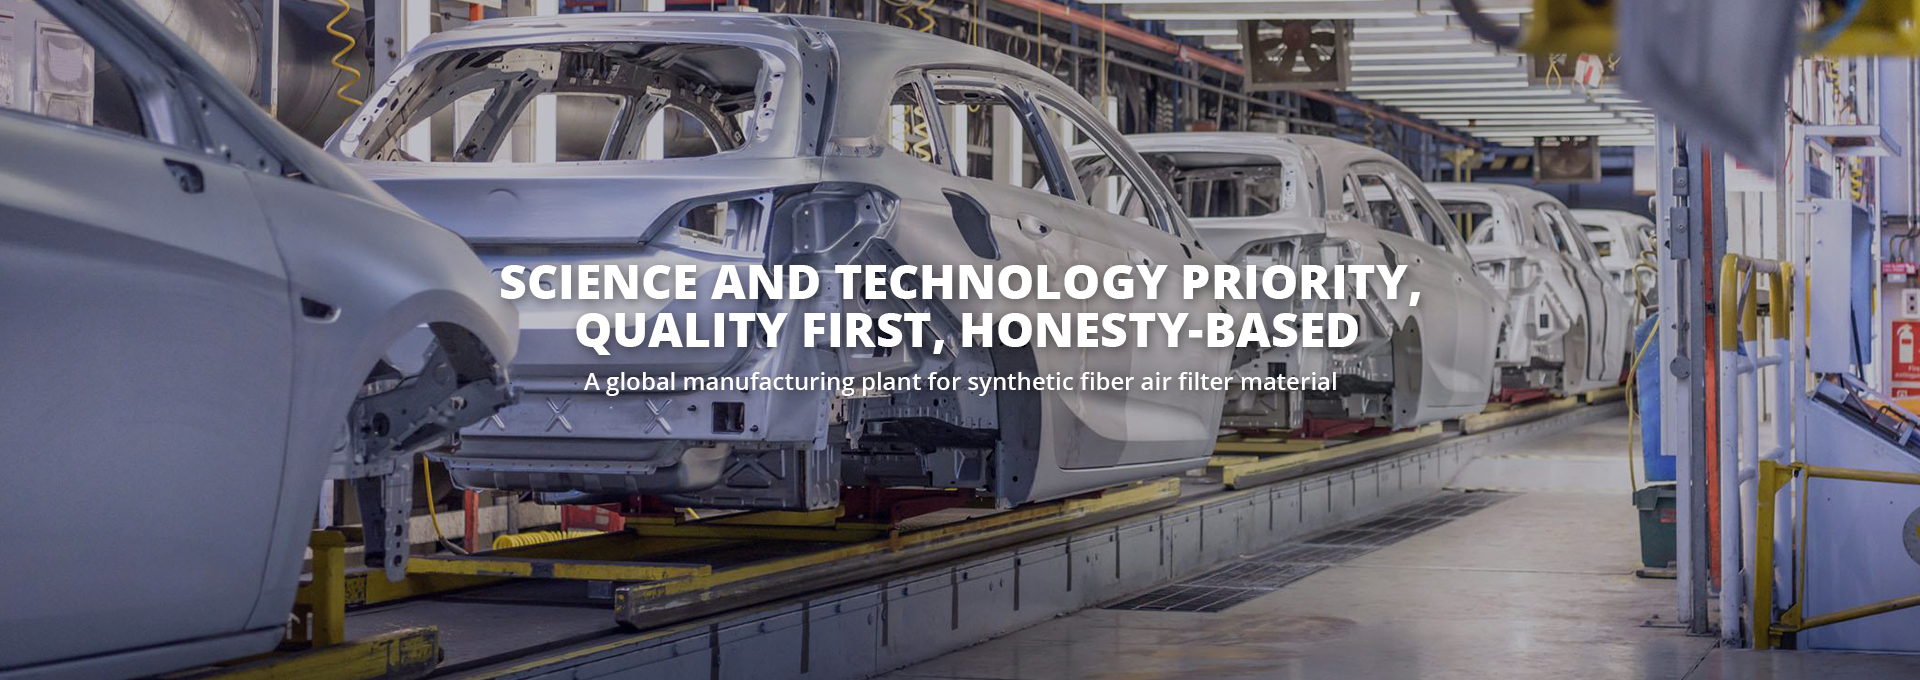 Science and technology priority, quality first, honesty-based